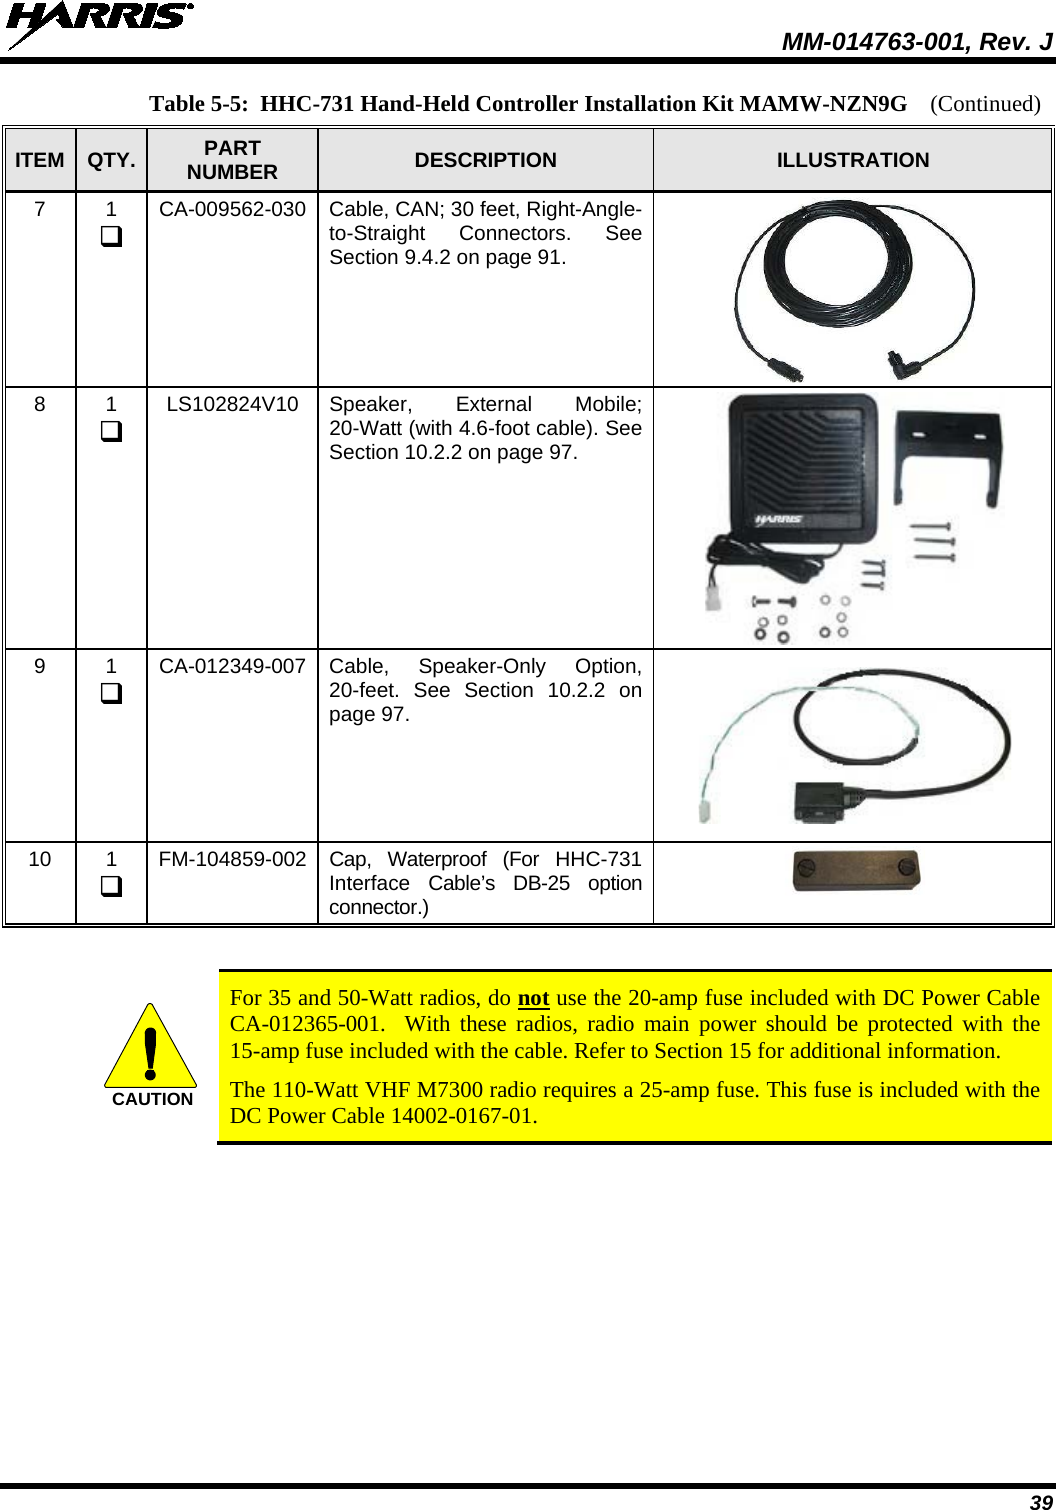  MM-014763-001, Rev. J 39 Table 5-5:  HHC-731 Hand-Held Controller Installation Kit MAMW-NZN9G ITEM QTY. PART NUMBER DESCRIPTION  ILLUSTRATION 7  1  CA-009562-030 Cable, CAN; 30 feet, Right-Angle-to-Straight Connectors. See Section 9.4.2 on page 91.  8  1  LS102824V10 Speaker, External Mobile; 20-Watt (with 4.6-foot cable). See Section 10.2.2 on page 97.  9  1  CA-012349-007 Cable,  Speaker-Only Option, 20-feet.  See Section 10.2.2 on page 97.  10  1  FM-104859-002 Cap, Waterproof (For HHC-731 Interface Cable’s  DB-25  option connector.)      For 35 and 50-Watt radios, do not use the 20-amp fuse included with DC Power Cable CA-012365-001.  With these radios, radio main power should be protected with the 15-amp fuse included with the cable. Refer to Section 15 for additional information. The 110-Watt VHF M7300 radio requires a 25-amp fuse. This fuse is included with the DC Power Cable 14002-0167-01.  CAUTION(Continued) 